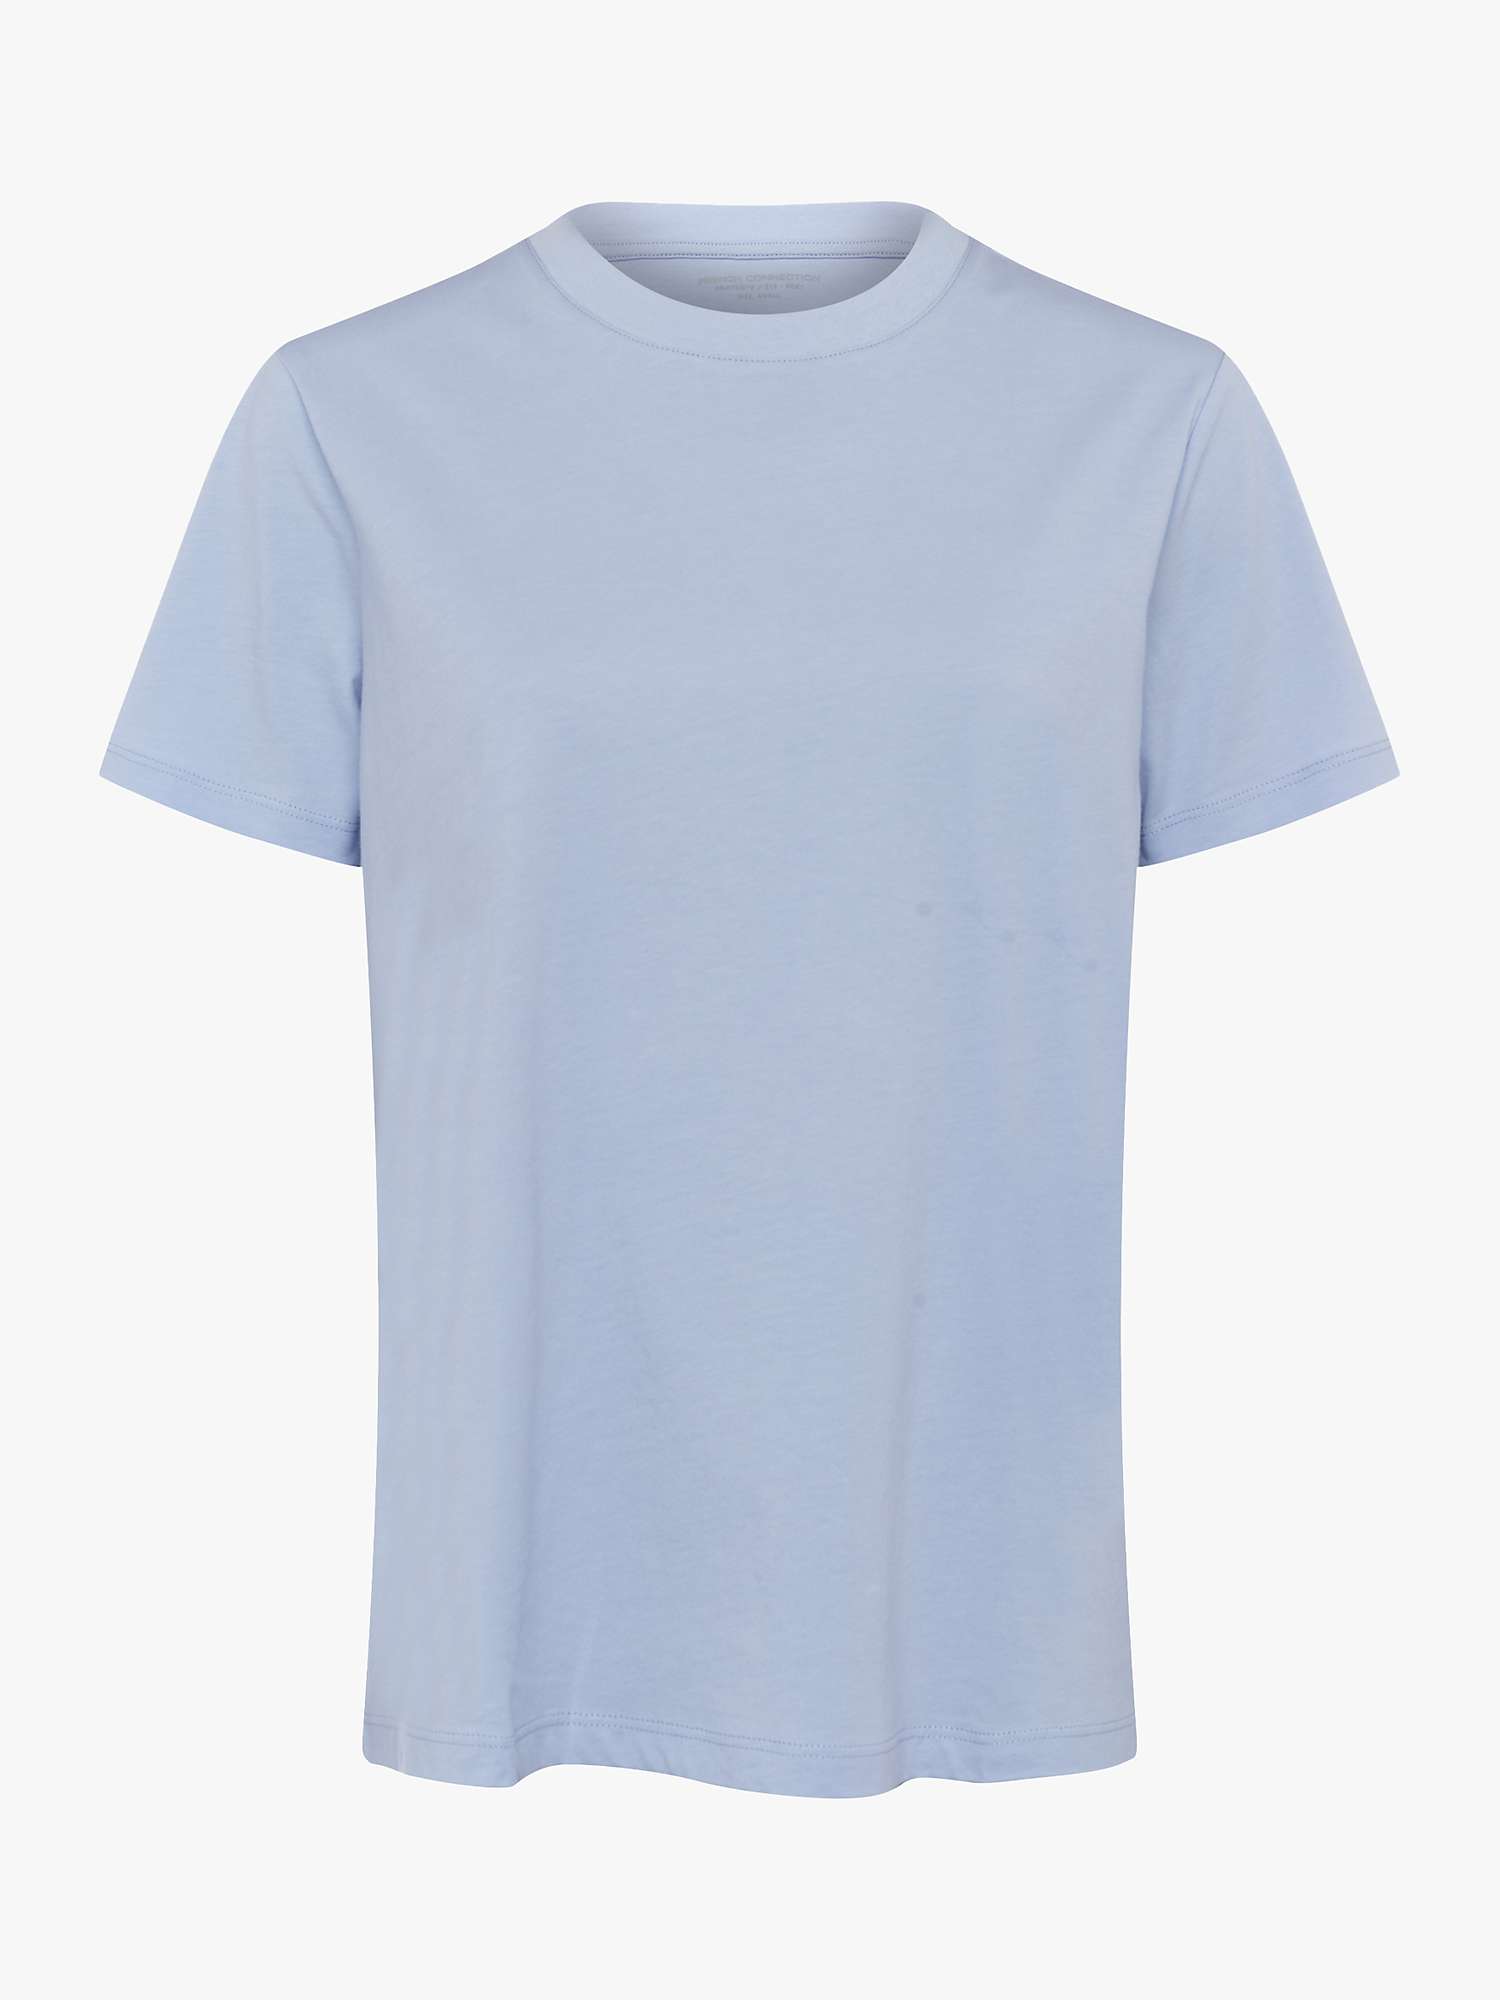 Buy French Connection Organic Cotton Boyfriend Fit Short Sleeve Tee Online at johnlewis.com